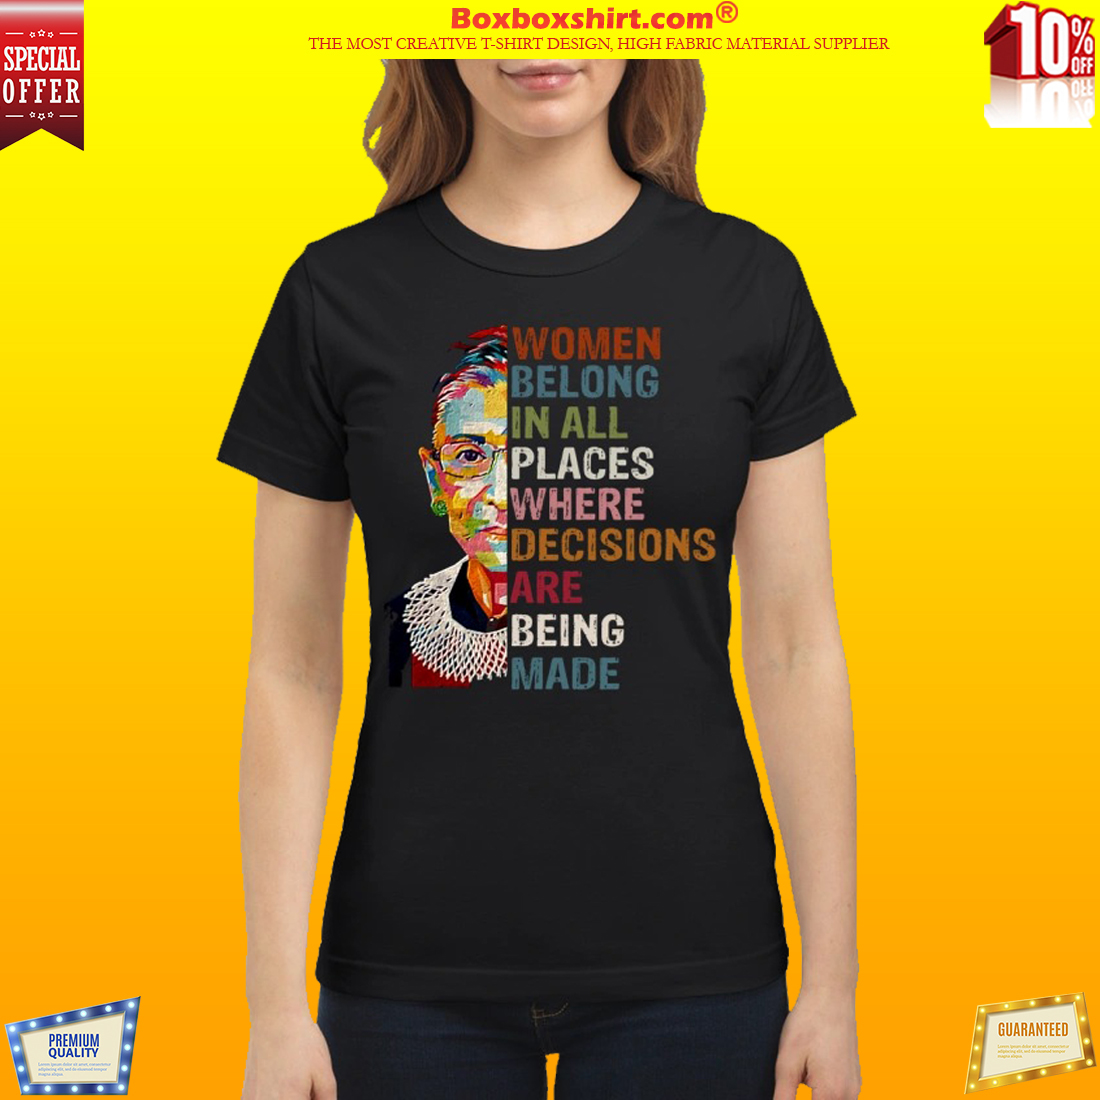 Justice Ginsburg Women belong in all places where decisions are being made shirt